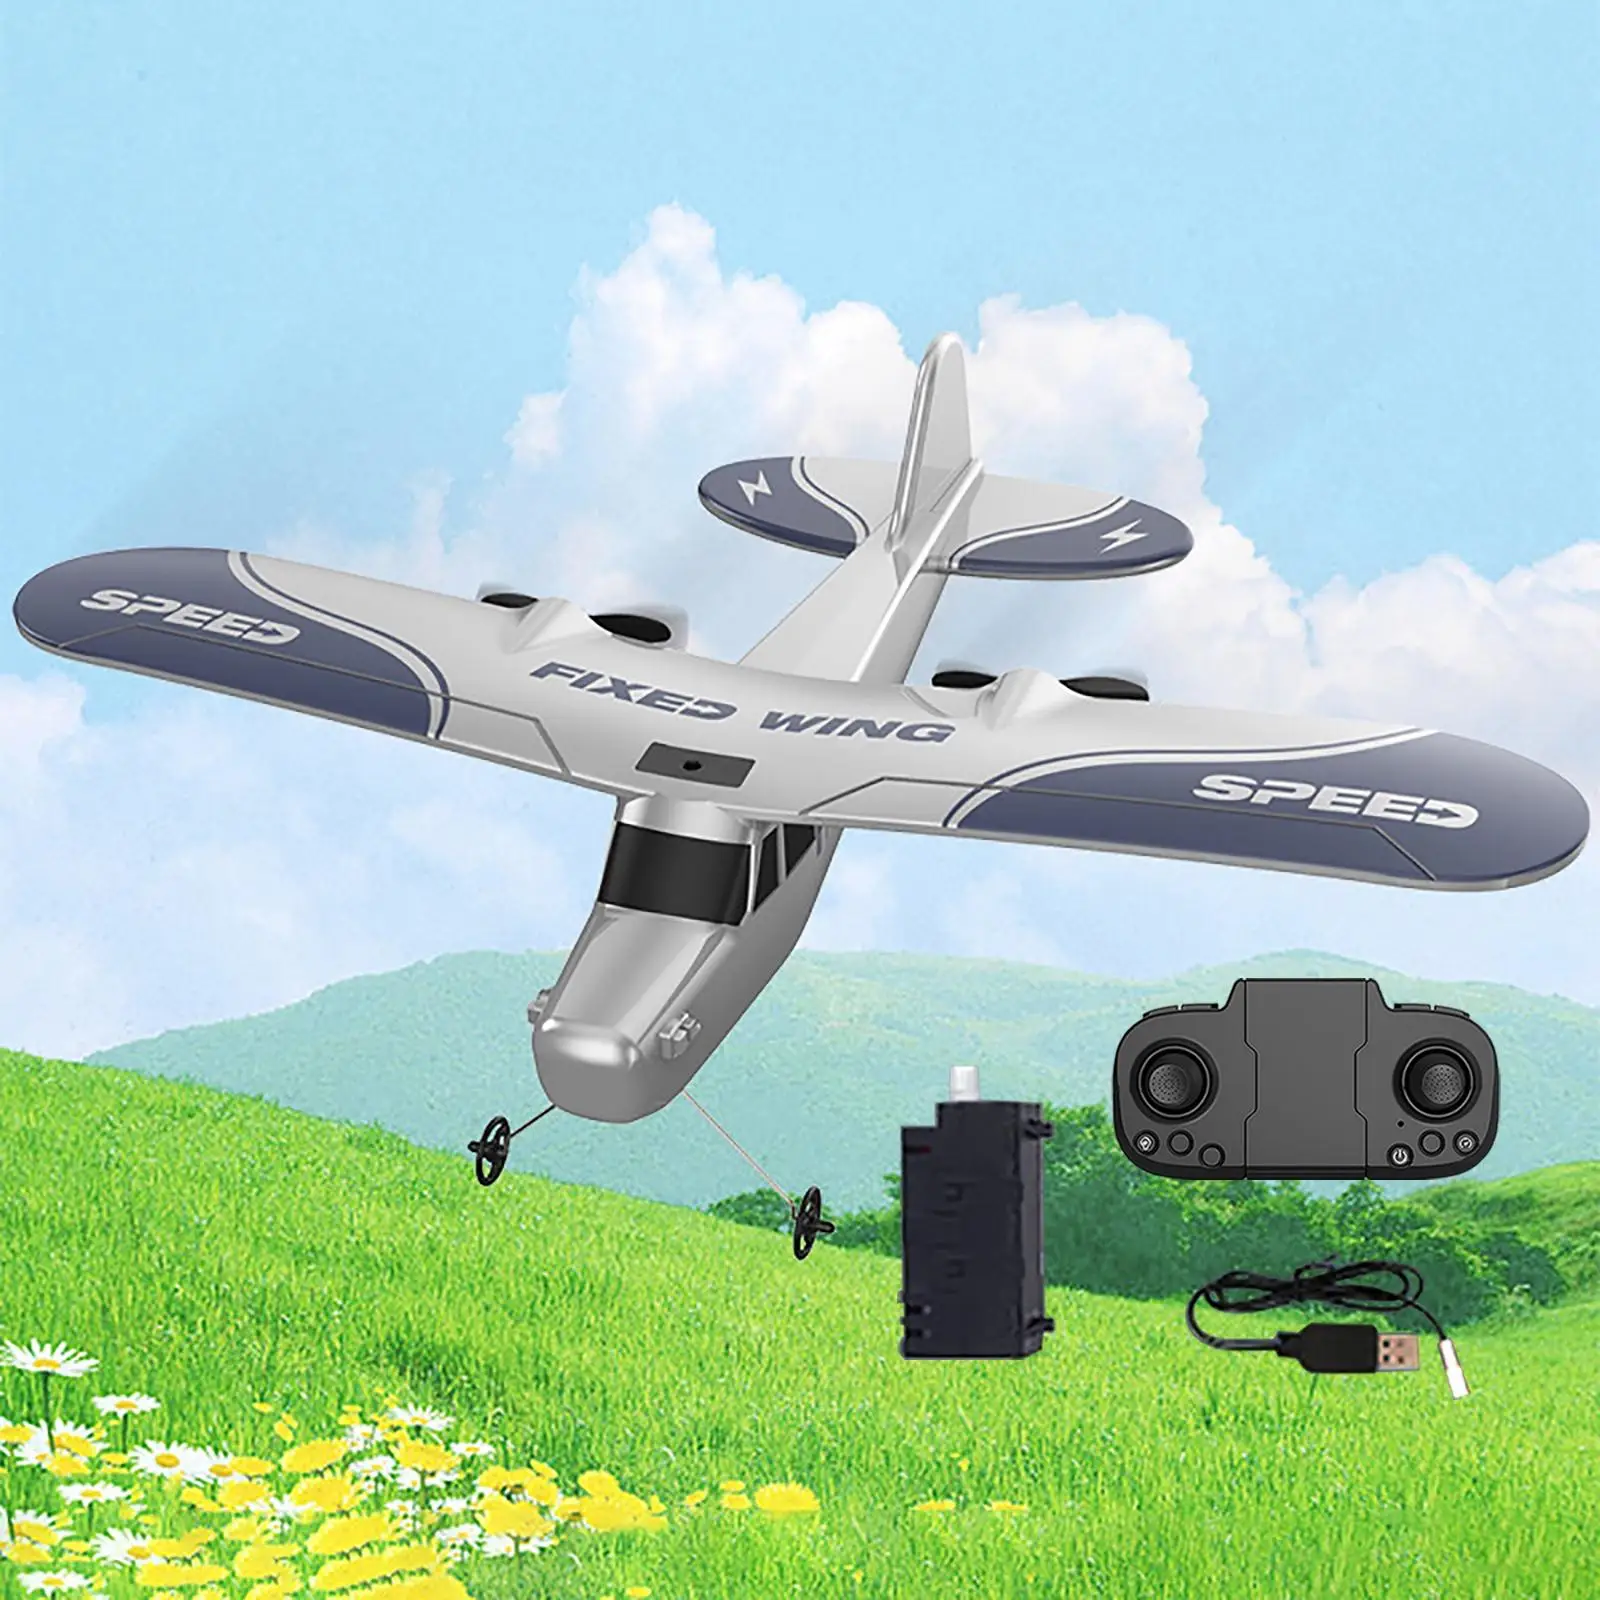 2.4G 2CH Remote Control Aircraft RC Airplane Model EPP Foam Fixed Wing